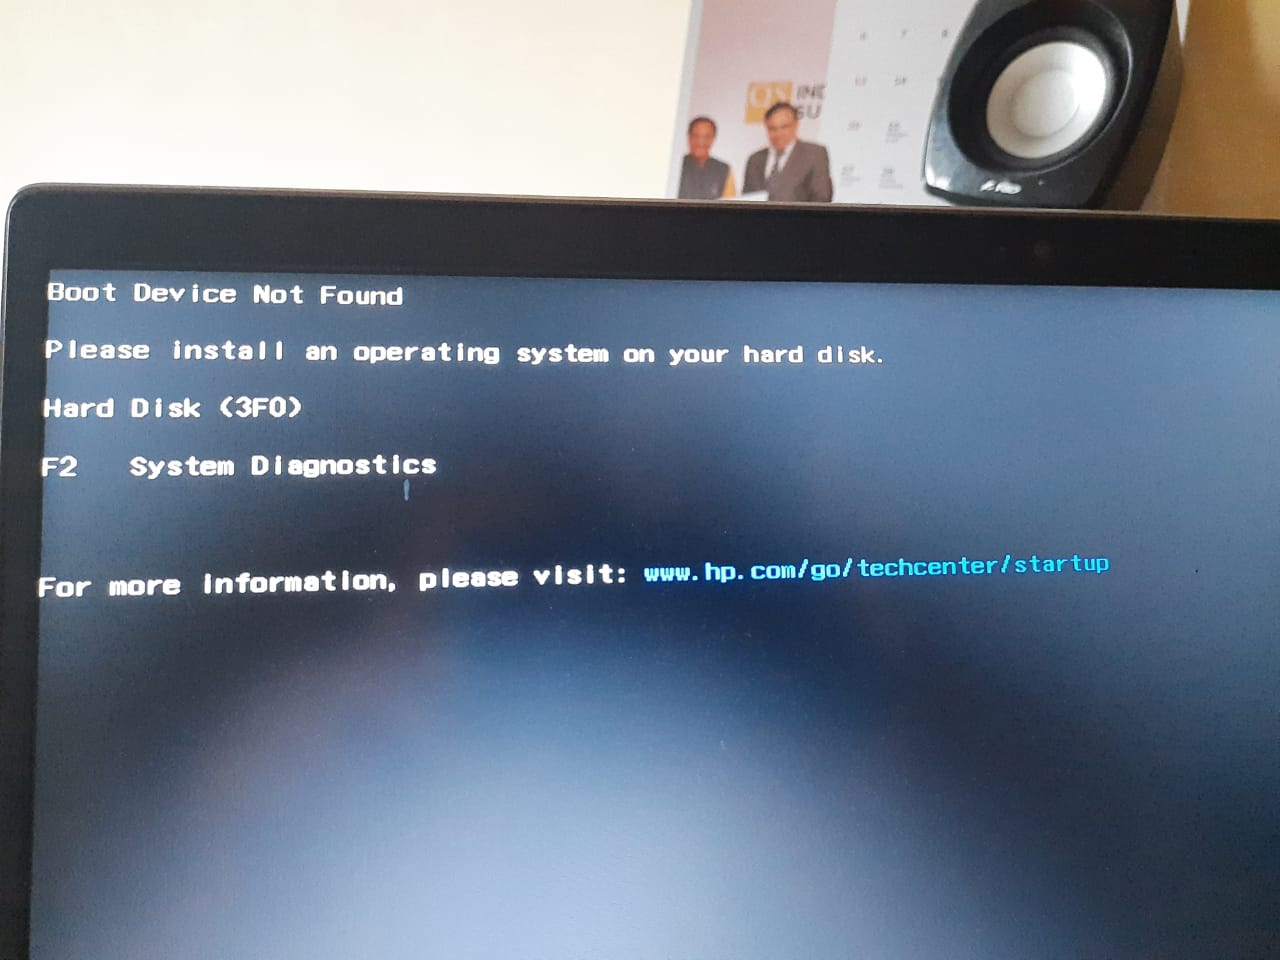 My laptop's screen glitches and freezes randomly - HP Support